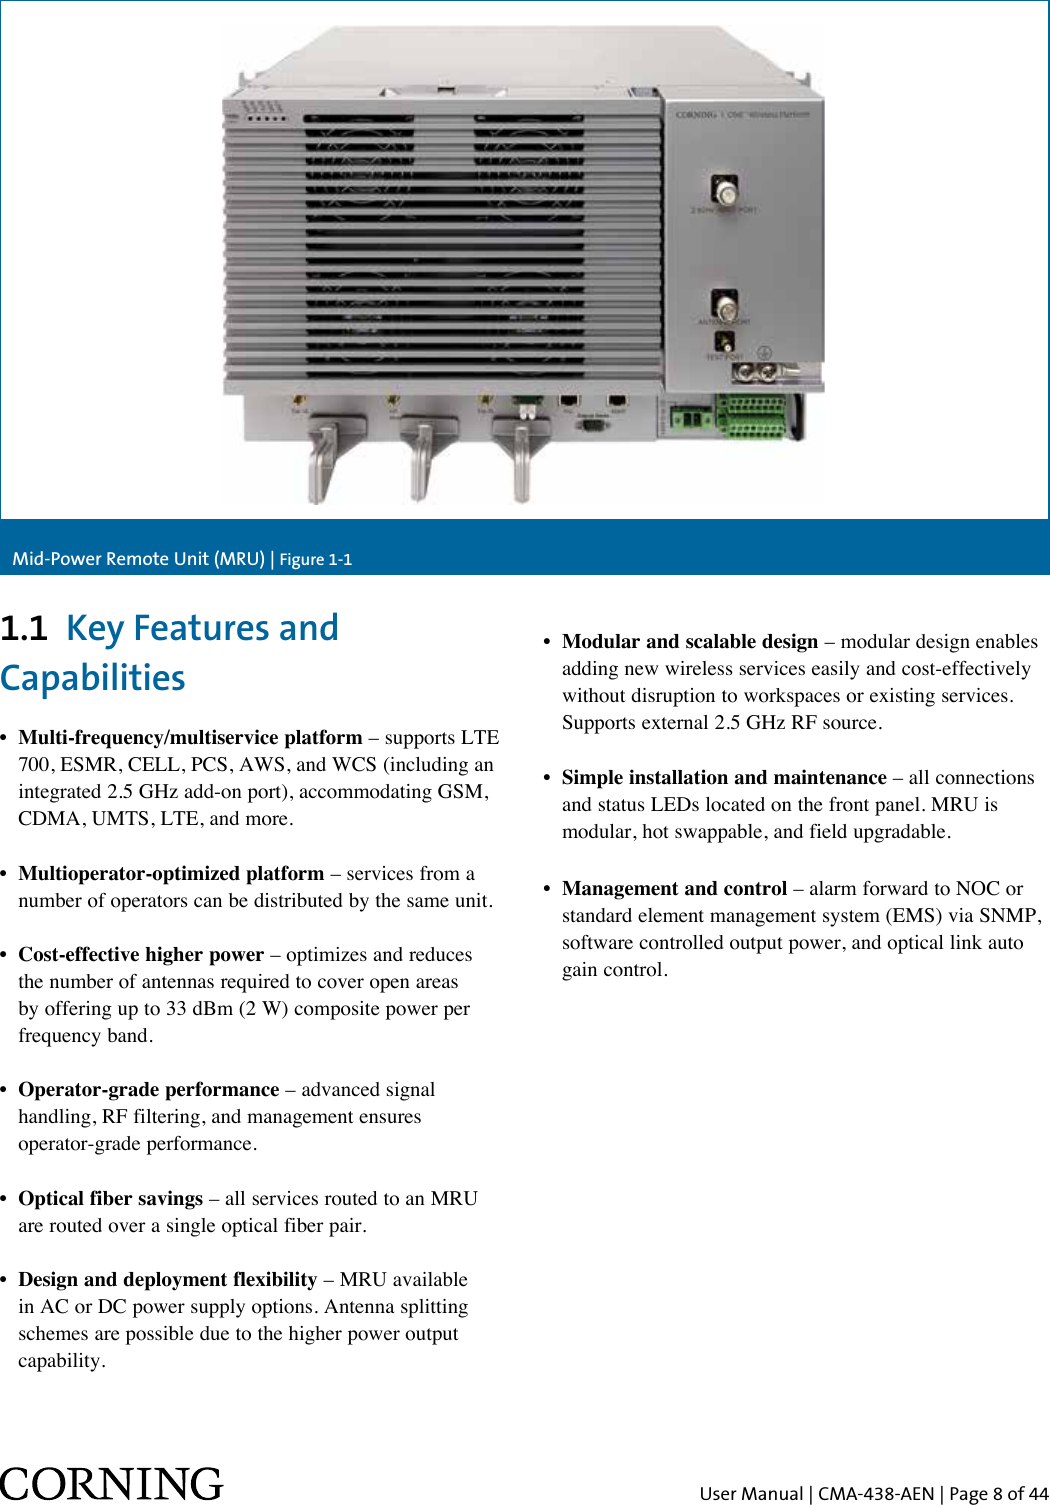 User Manual | CMA-438-AEN | Page 8 of 44Mid-Power Remote Unit (MRU) | Figure 1-11.1  Key Features and Capabilities•   Multi-frequency/multiservice  platform – supports LTE 700, ESMR, CELL, PCS, AWS, and WCS (including an integrated 2.5 GHz add-on port), accommodating GSM, CDMA, UMTS, LTE, and more.•  Multioperator-optimized platform – services from a number of operators can be distributed by the same unit.•  Cost-effective higher power – optimizes and reduces the number of antennas required to cover open areas by offering up to 33 dBm (2 W) composite power per frequency band.•  Operator-grade performance – advanced signal handling, RF filtering, and management ensures  operator-grade performance.•  Optical fiber savings – all services routed to an MRU are routed over a single optical fiber pair.•  Design and deployment flexibility – MRU available in AC or DC power supply options. Antenna splitting schemes are possible due to the higher power output capability.•  Modular and scalable design – modular design enables adding new wireless services easily and cost-effectively without disruption to workspaces or existing services. Supports external 2.5 GHz RF source.•  Simple installation and maintenance – all connections and status LEDs located on the front panel. MRU is modular, hot swappable, and field upgradable.•  Management and control – alarm forward to NOC or standard element management system (EMS) via SNMP, software controlled output power, and optical link auto gain control.